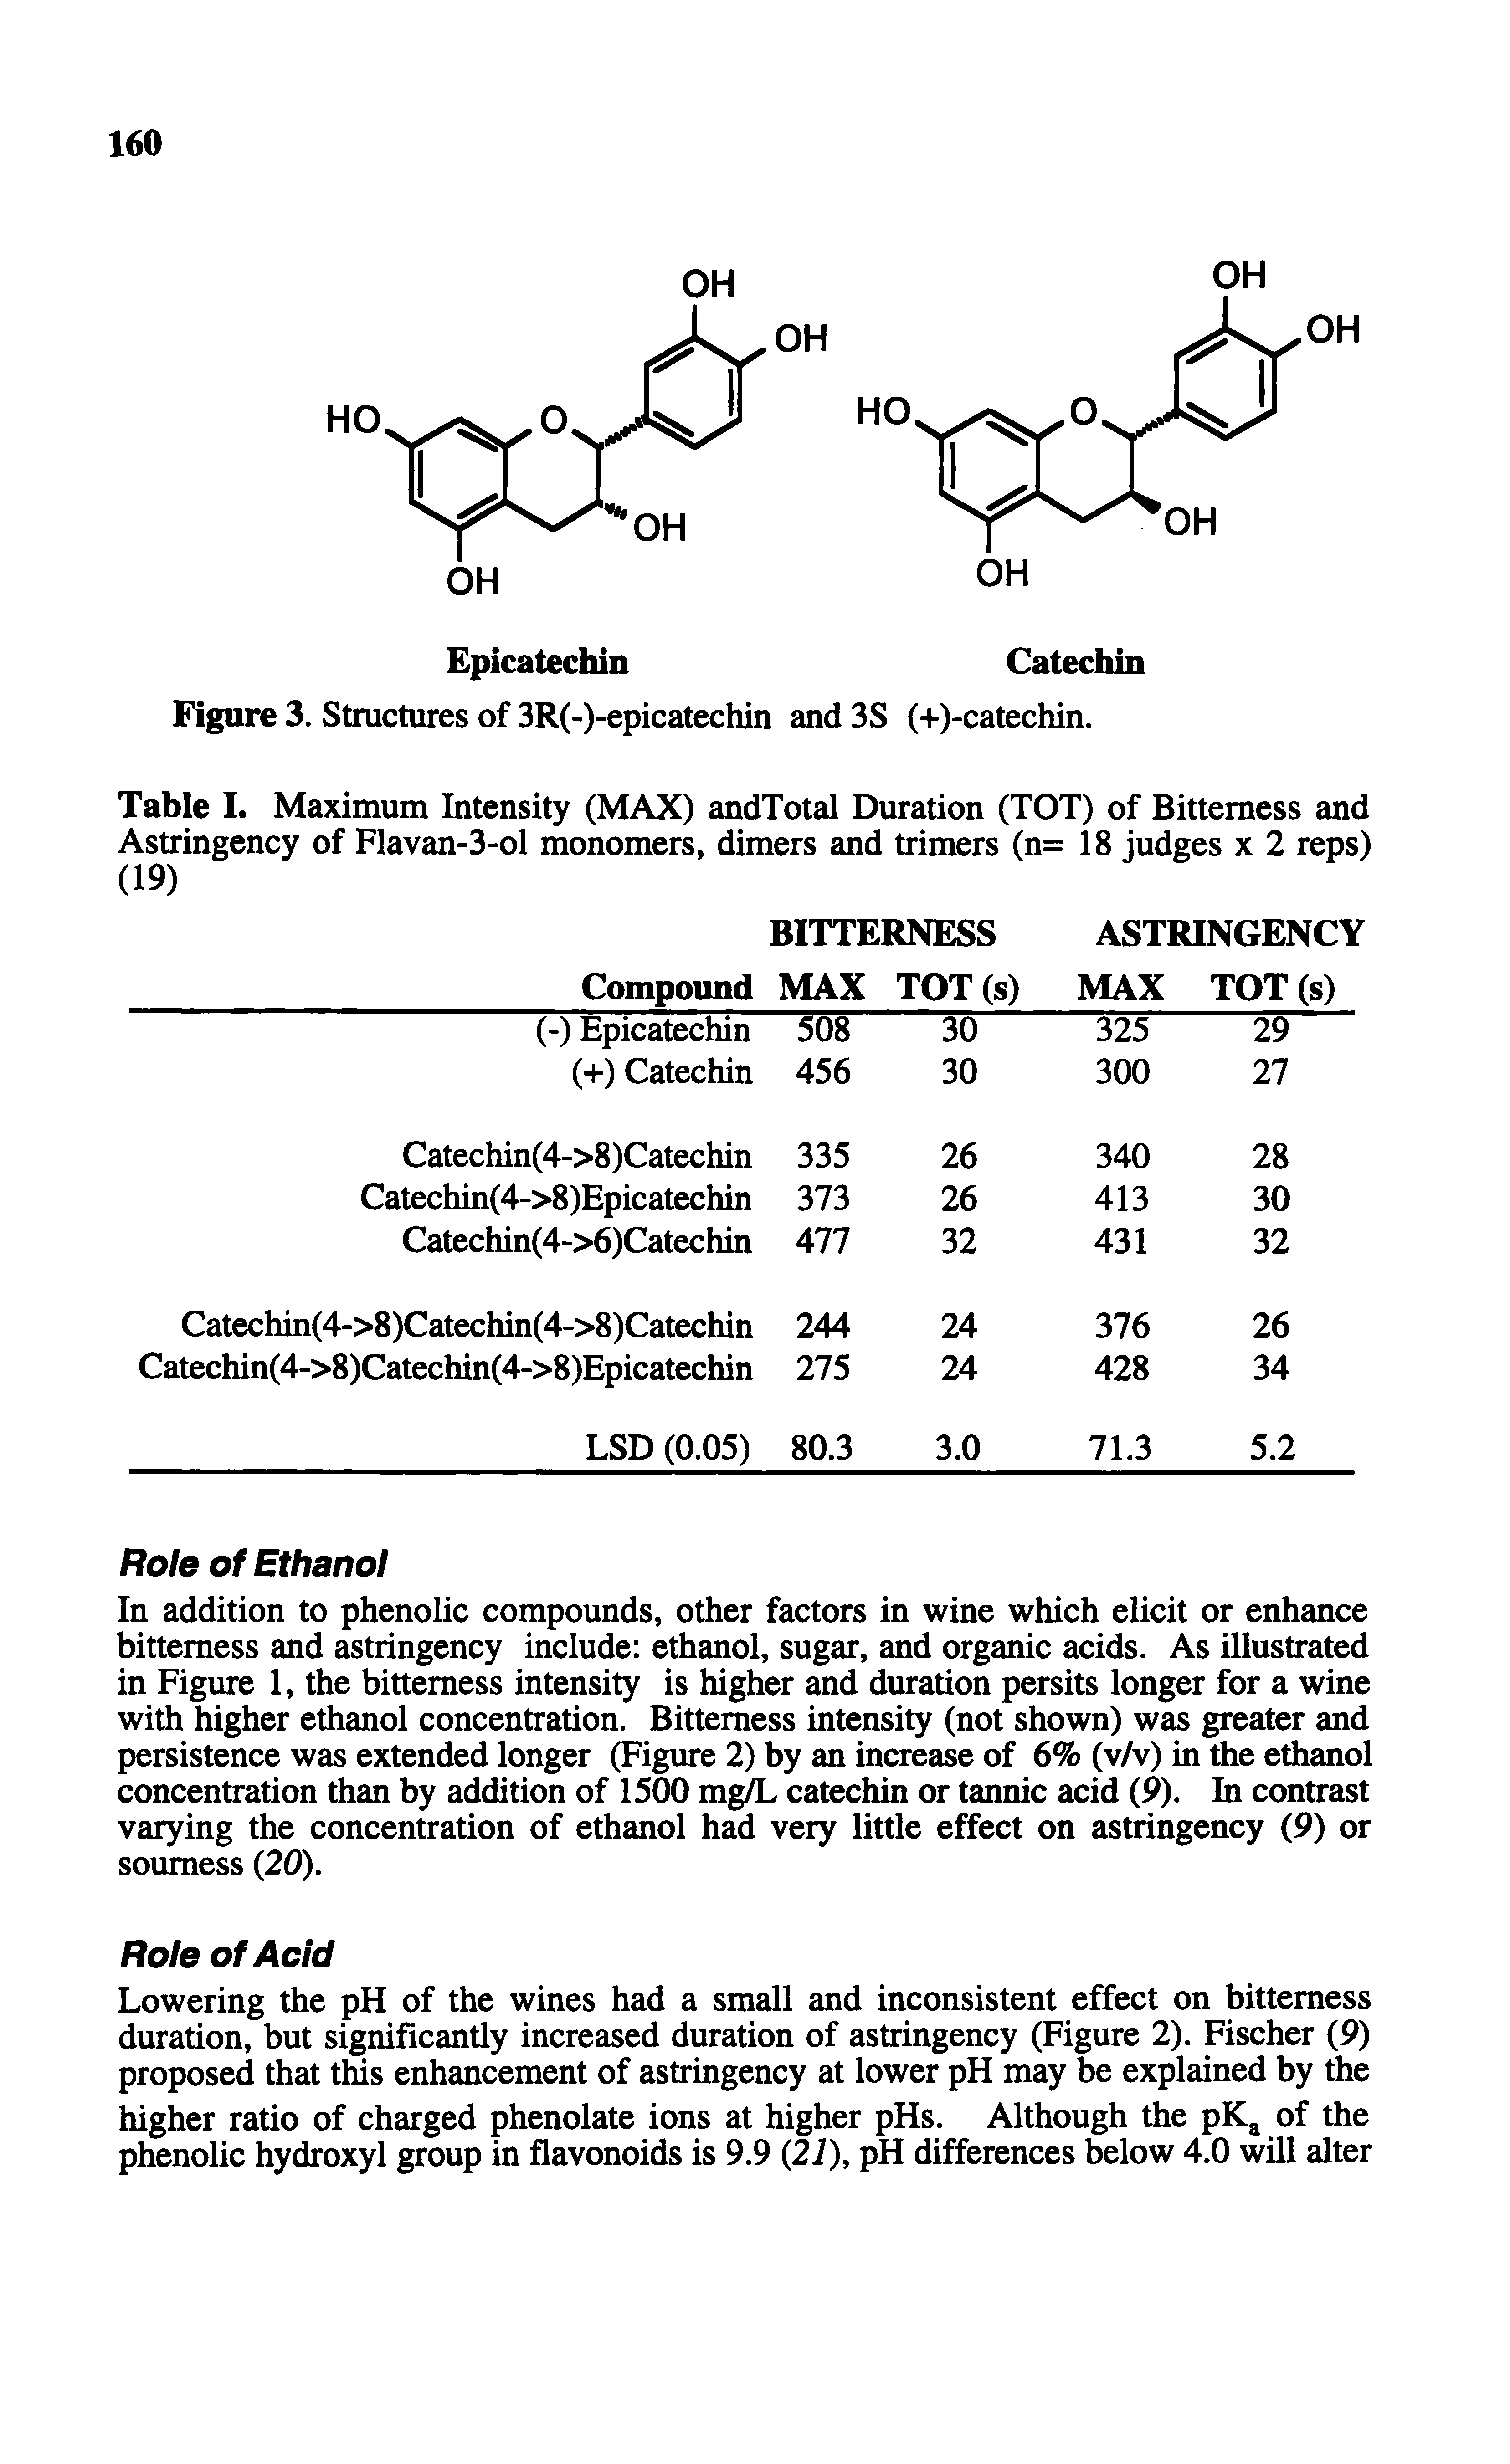 Table I. Maximum Intensity (MAX) andTotal Duration (TOT) of Bitterness and Astringency of Flavan-3-ol monomers, dimers and trimers (n= 18 judges x 2 reps) (19)...